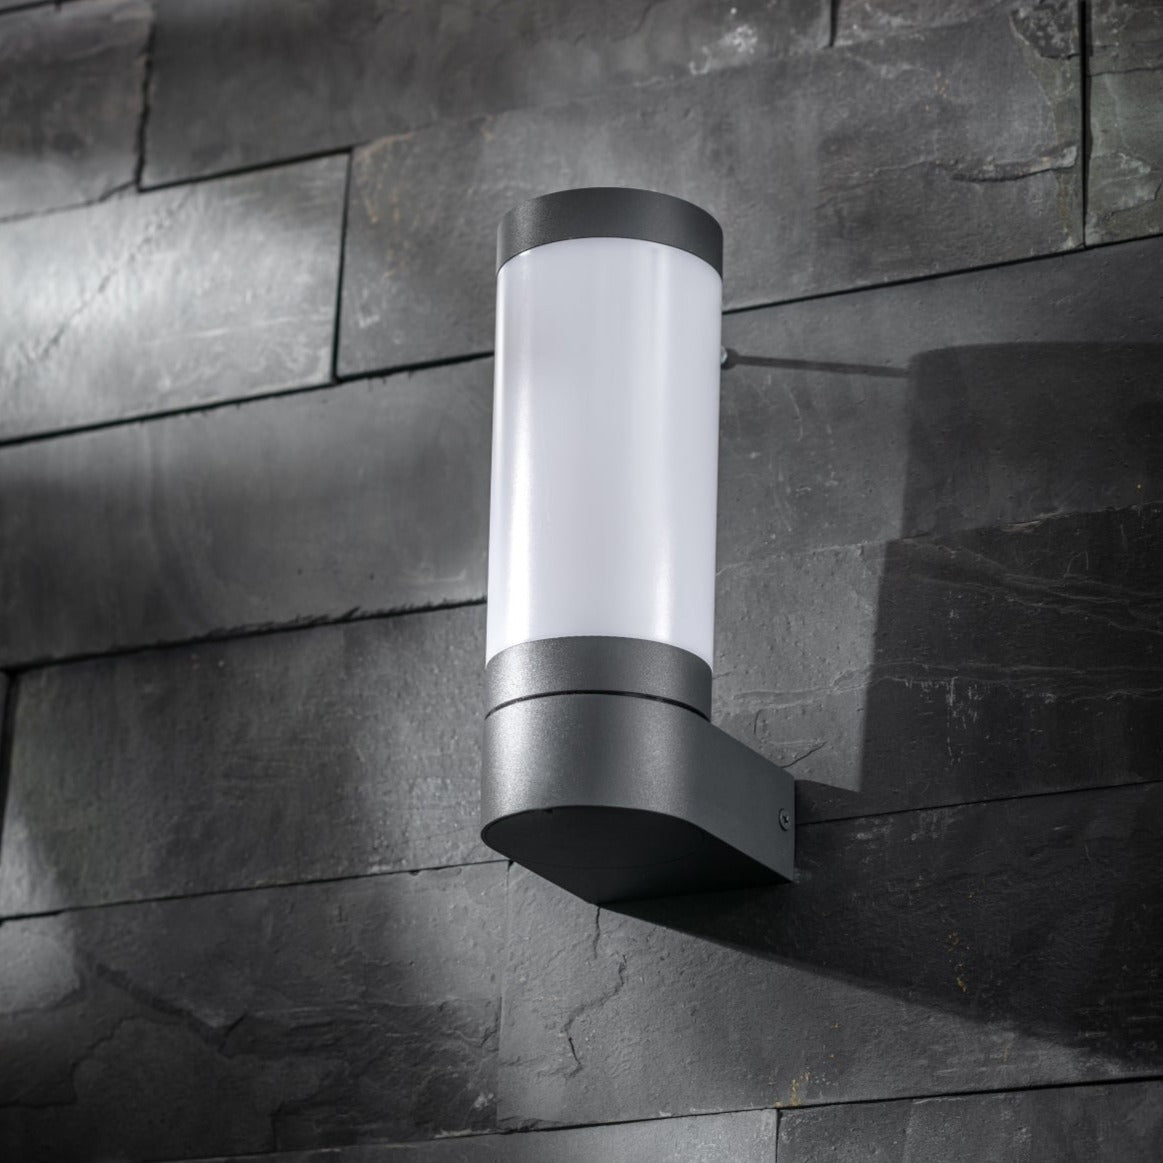 Our Rome grey anthracite outdoor wall light with opal diffuser would look perfect in a modern or more traditional home design. Outside wall lights can provide atmospheric light in your garden, at the front door or on the terrace as well as a great security solution. It is designed for durability and longevity with its robust material producing a fully weatherproof and water resistant light fitting.